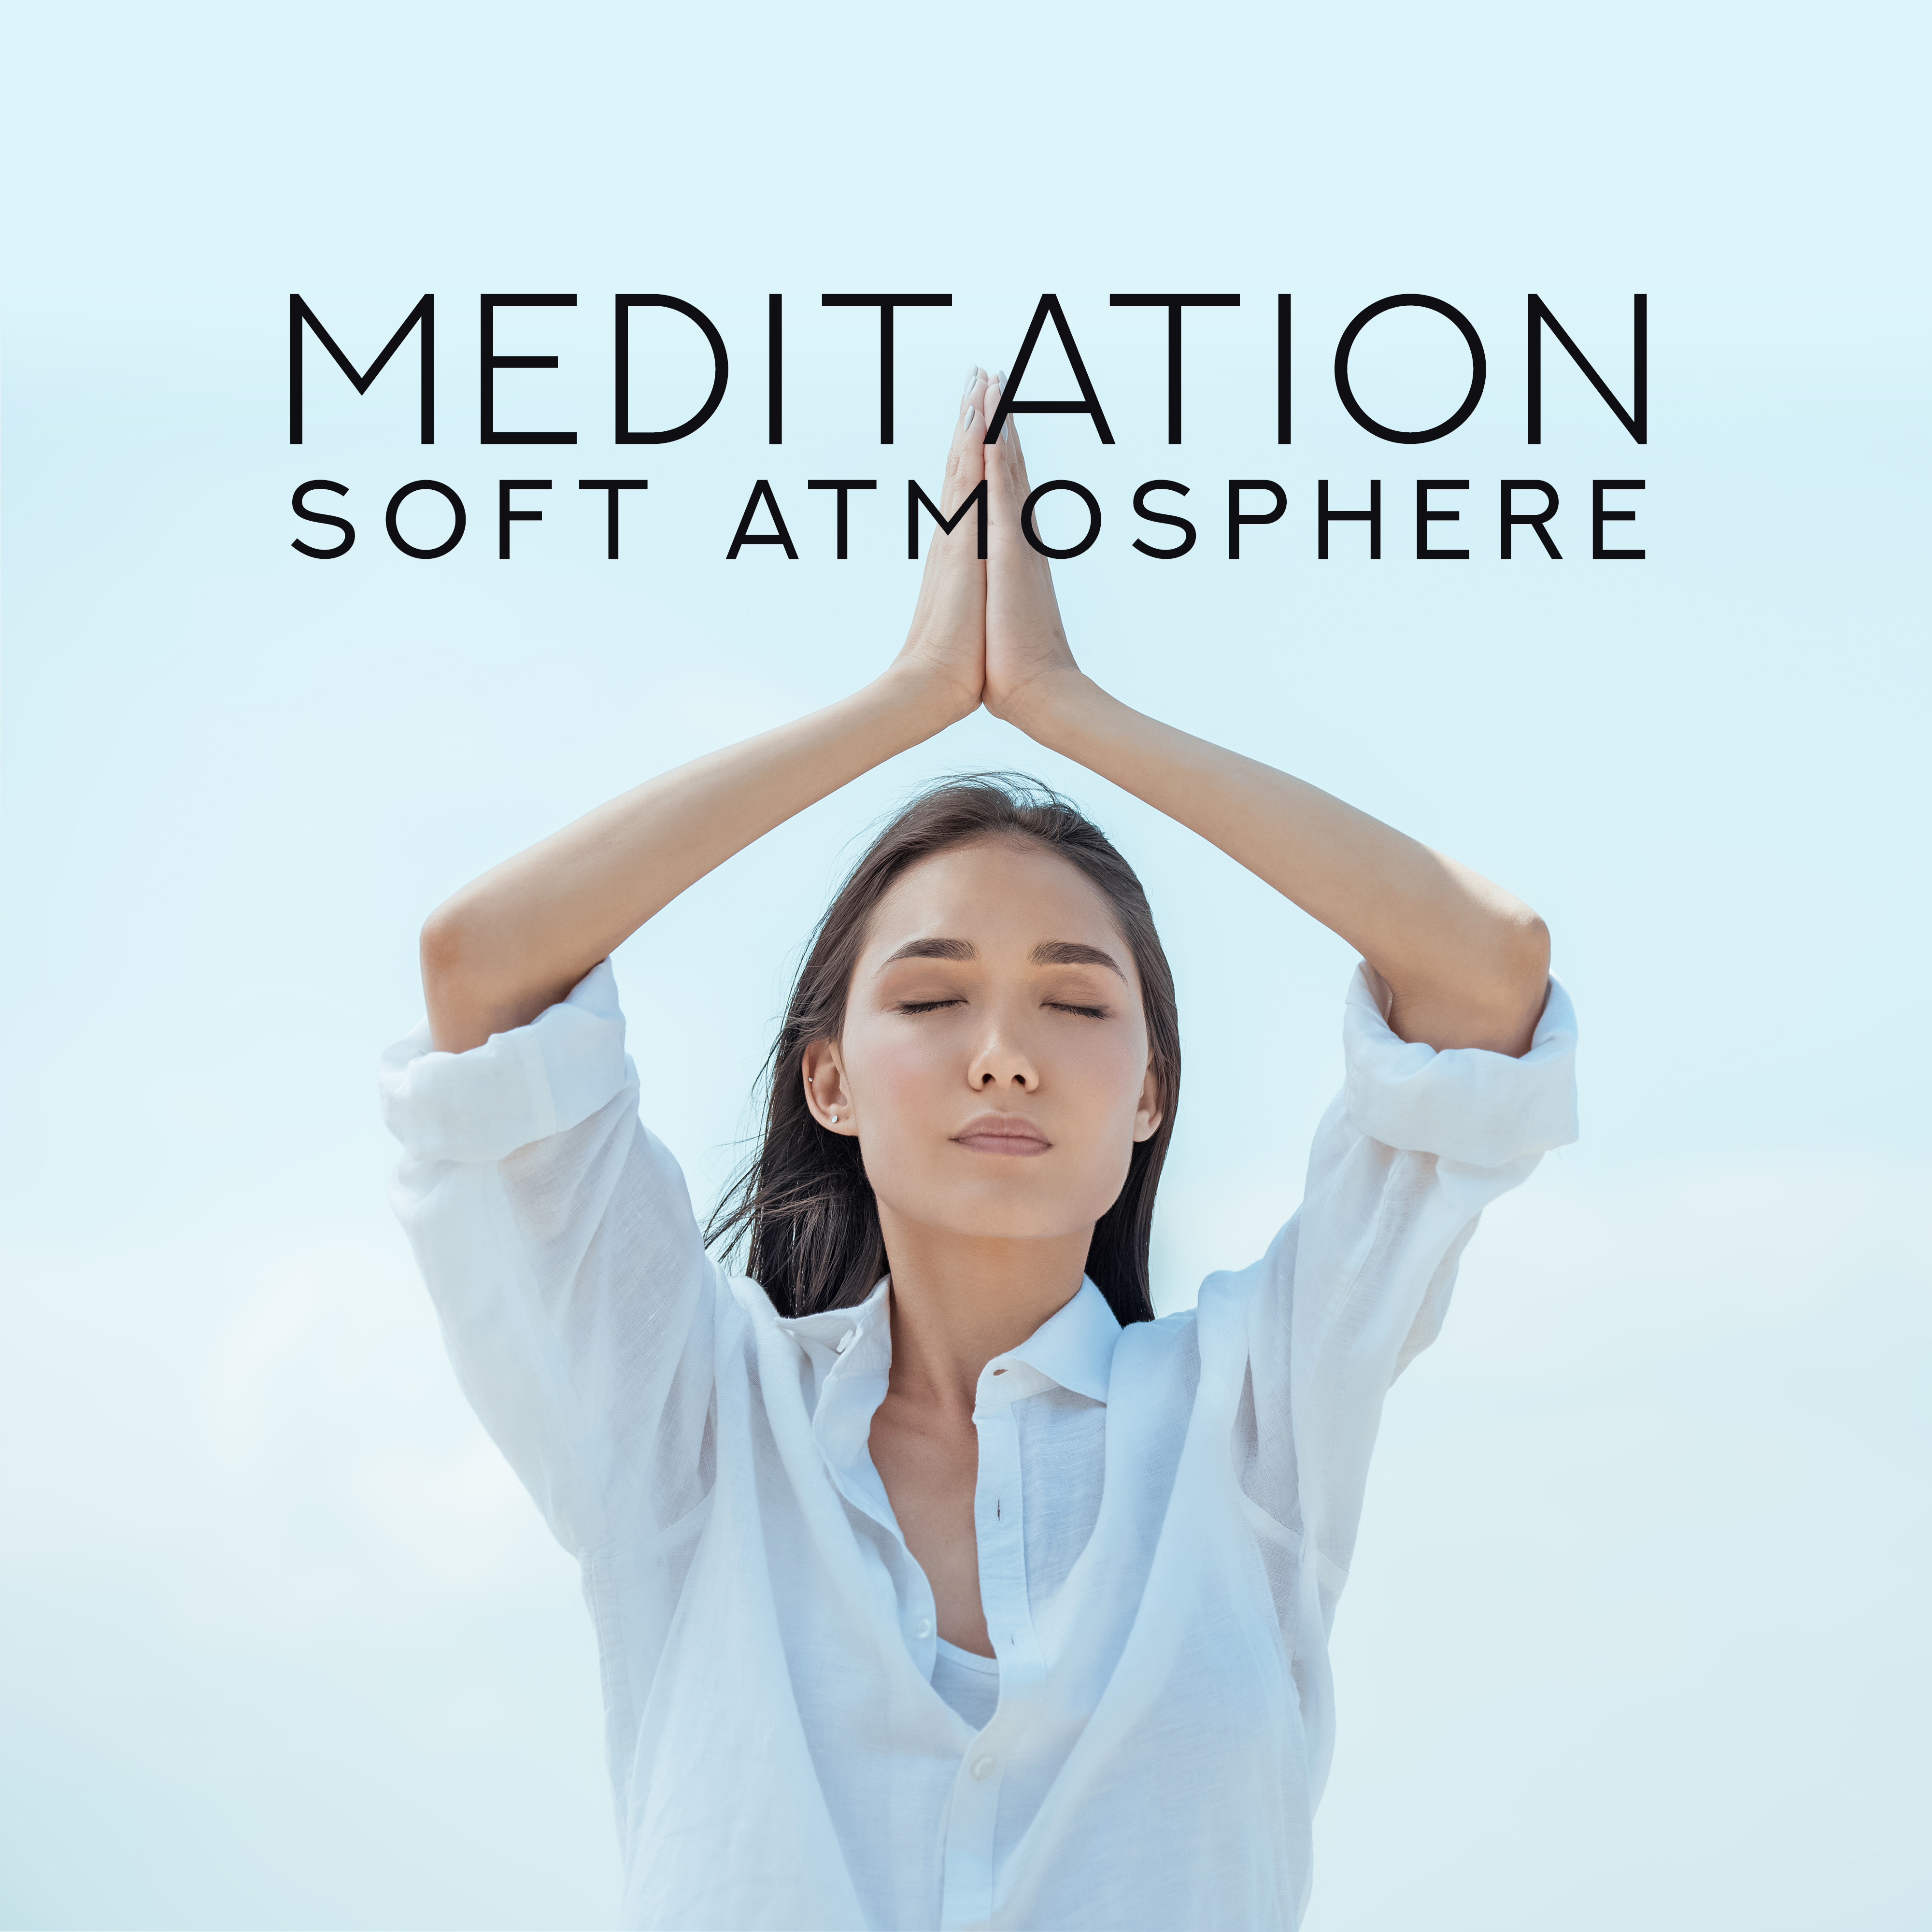 Meditation Soft Atmosphere – New Age Yoga & Relax Music, Body, Mind & Soul Calmness, Healing Sounds